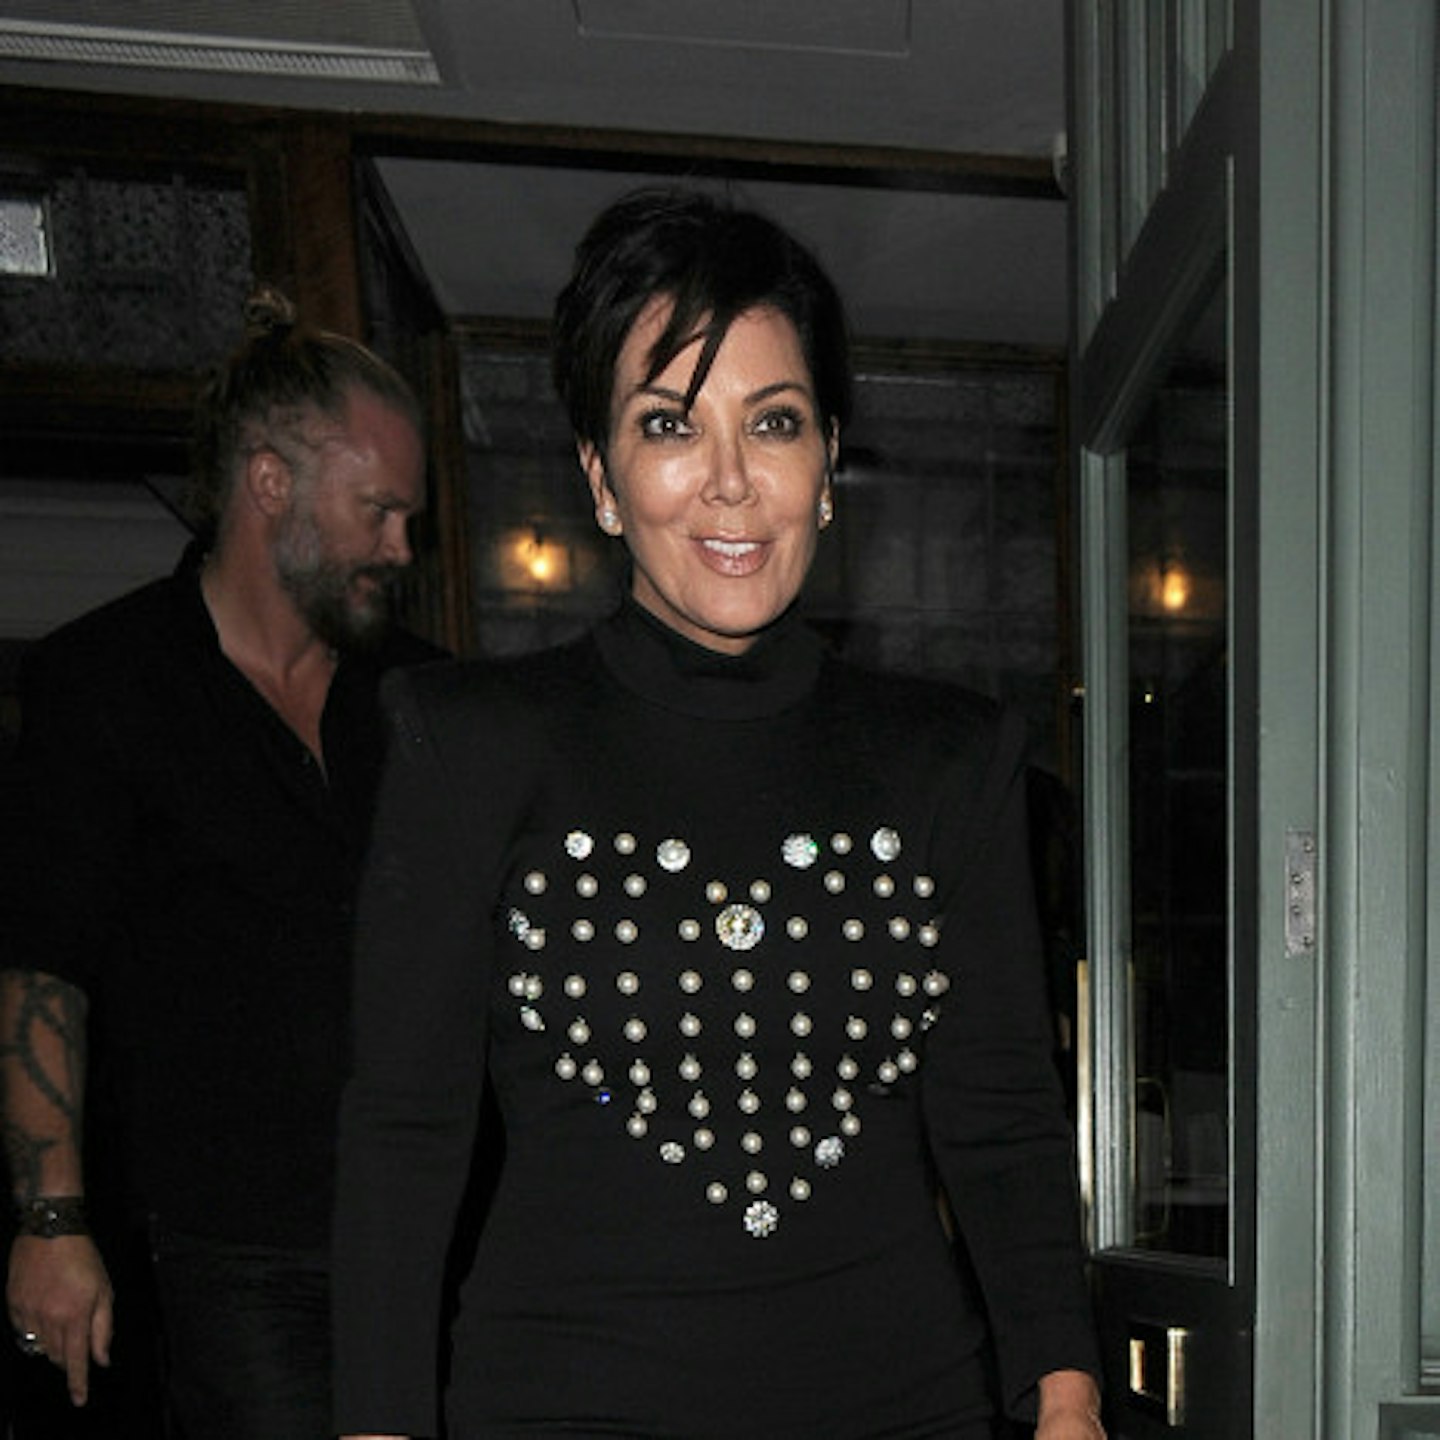 Kris Jenner was left upset my Caitlyn's comments